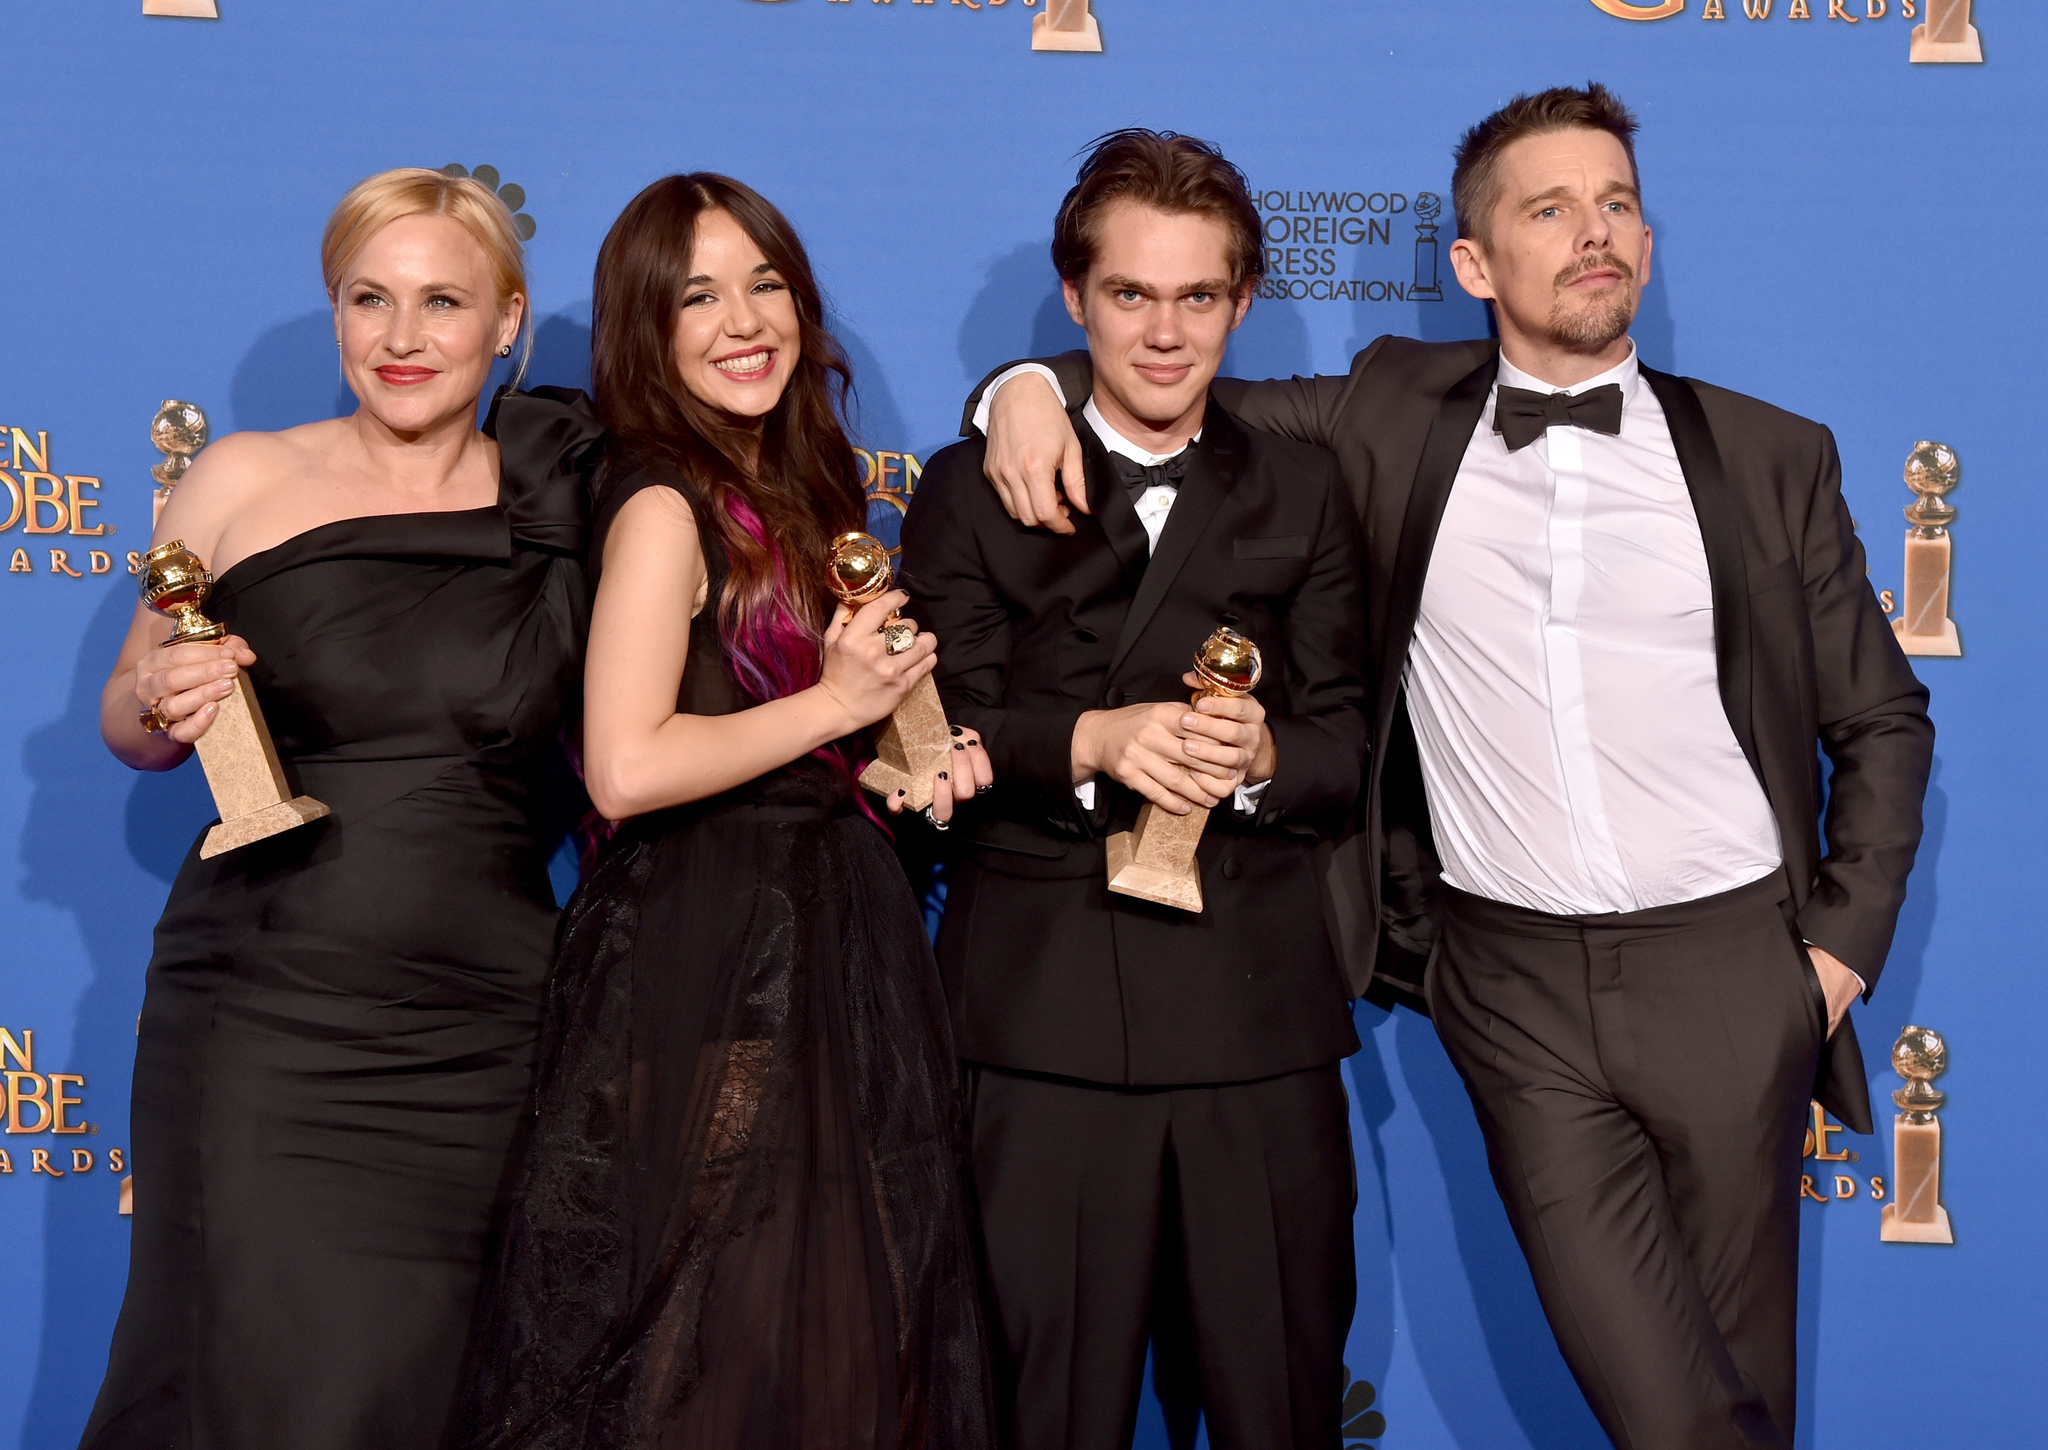 Patricia Arquette, Ethan Hawke, Lorelei Linklater and Ellar Coltrane at event of The 72nd Annual Golden Globe Awards (2015)